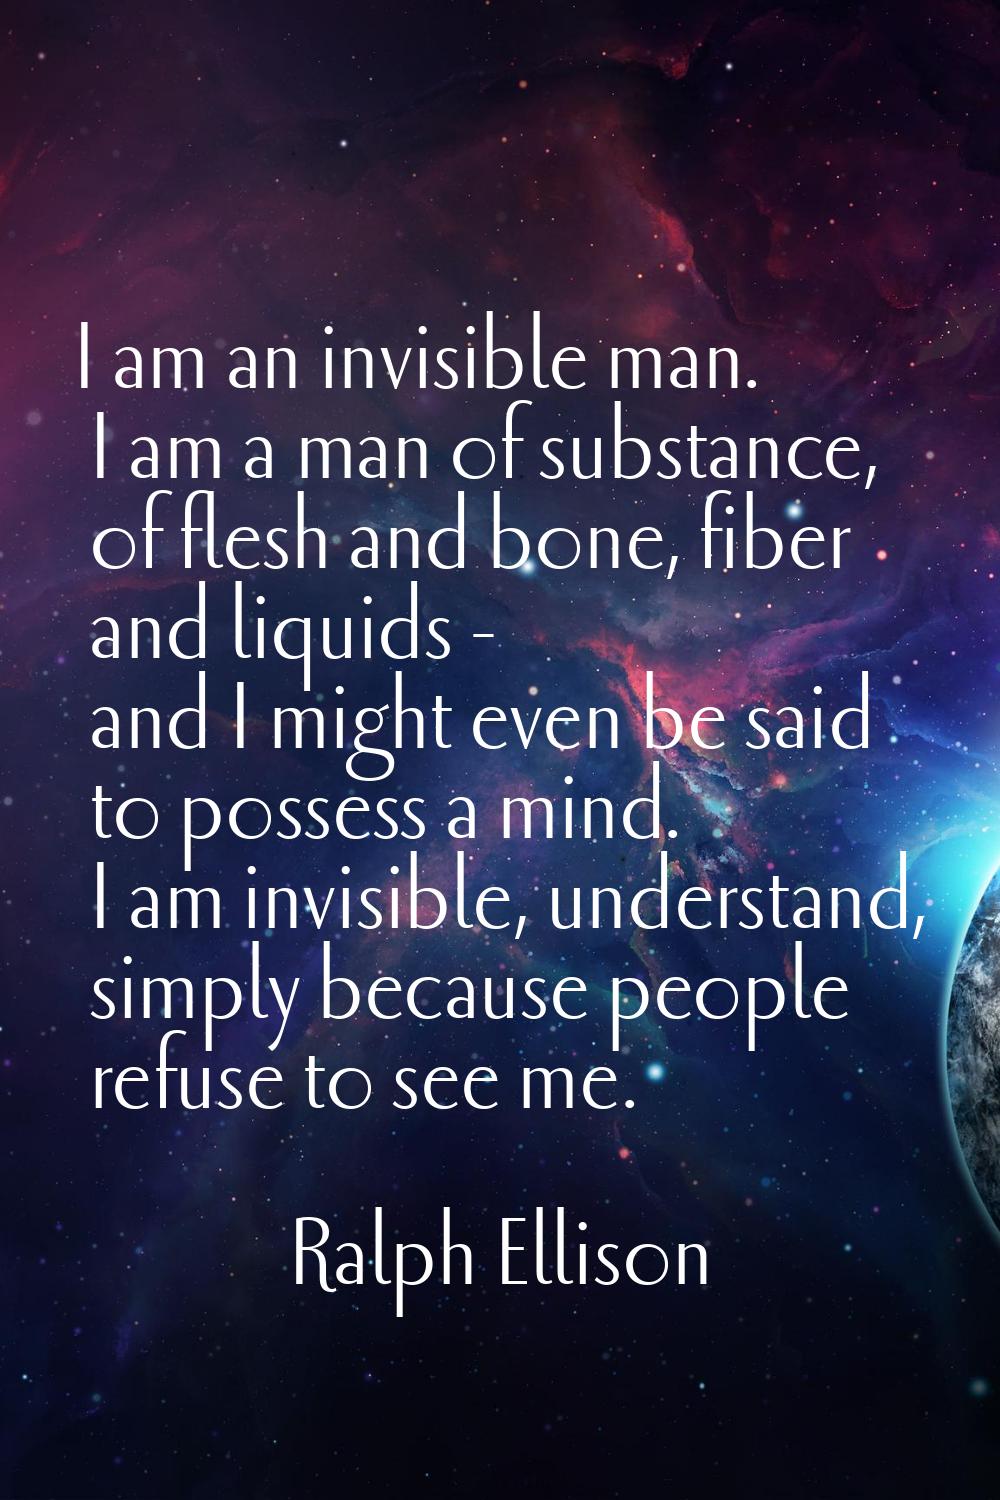 I am an invisible man. I am a man of substance, of flesh and bone, fiber and liquids - and I might 